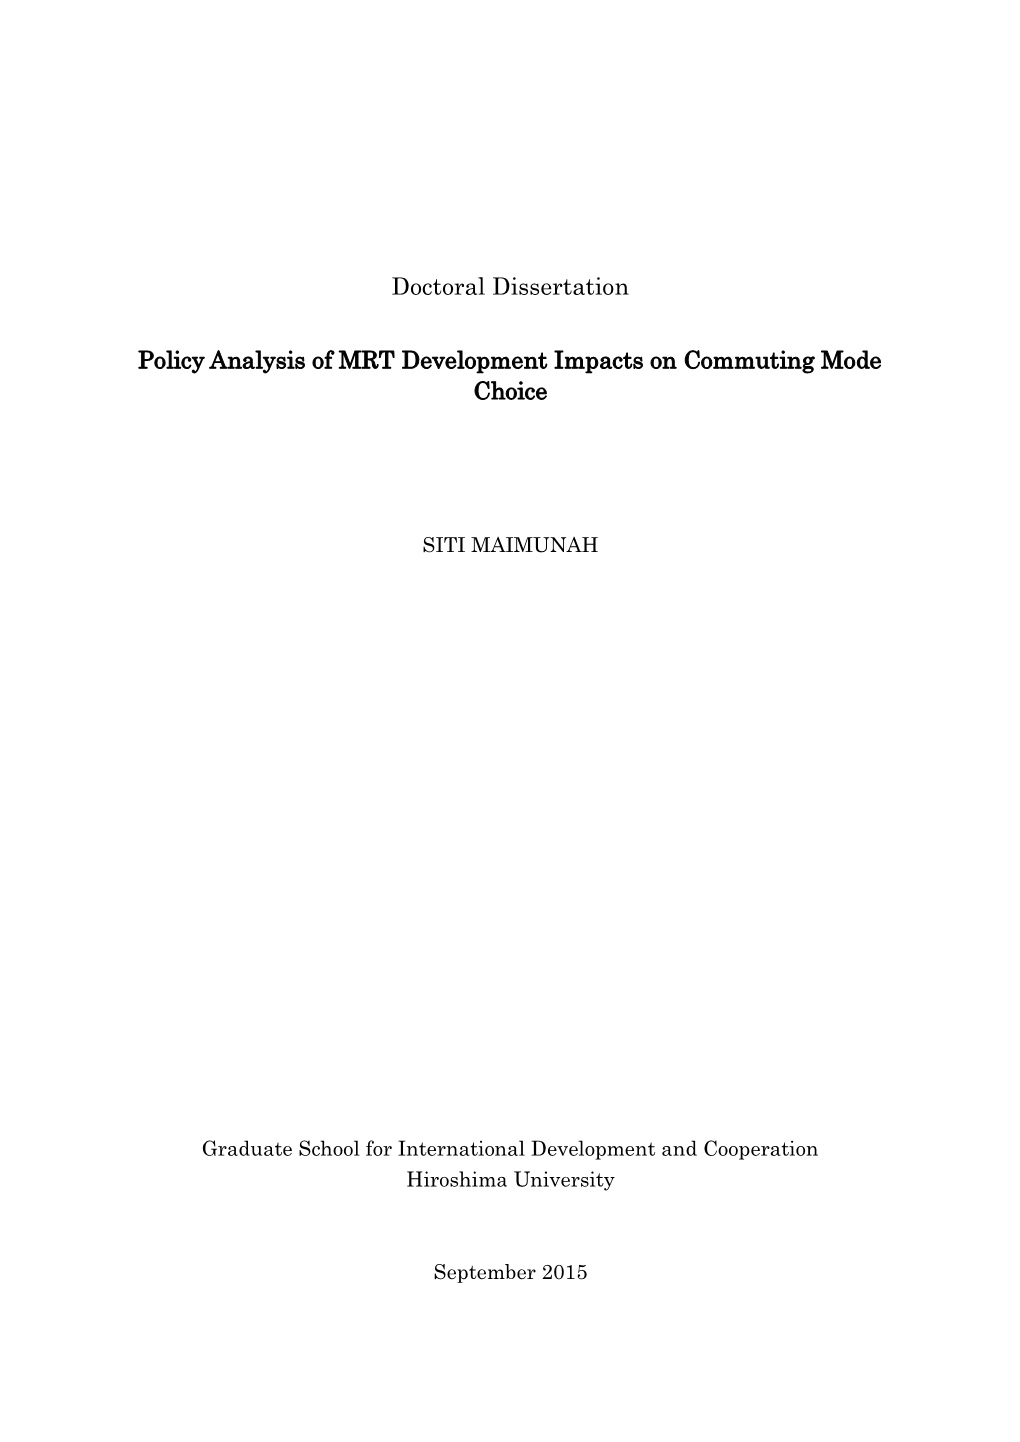 Doctoral Dissertation Policy Analysis of MRT Development Impacts On